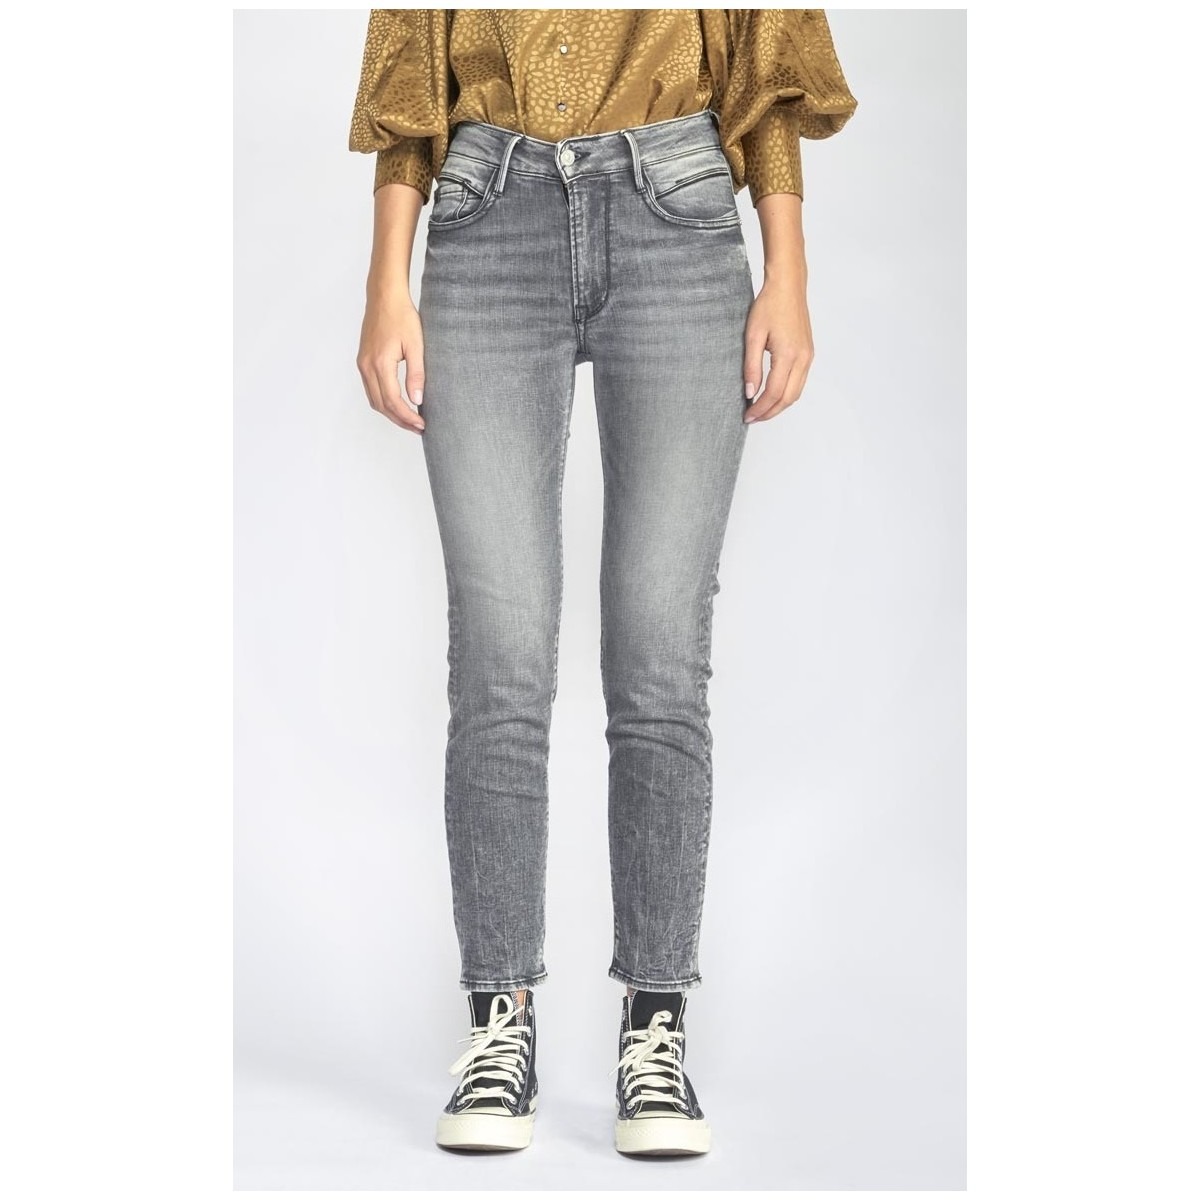 Spartoo Lady Jeans in Grey by Le Temps des Cerises GOOFASH